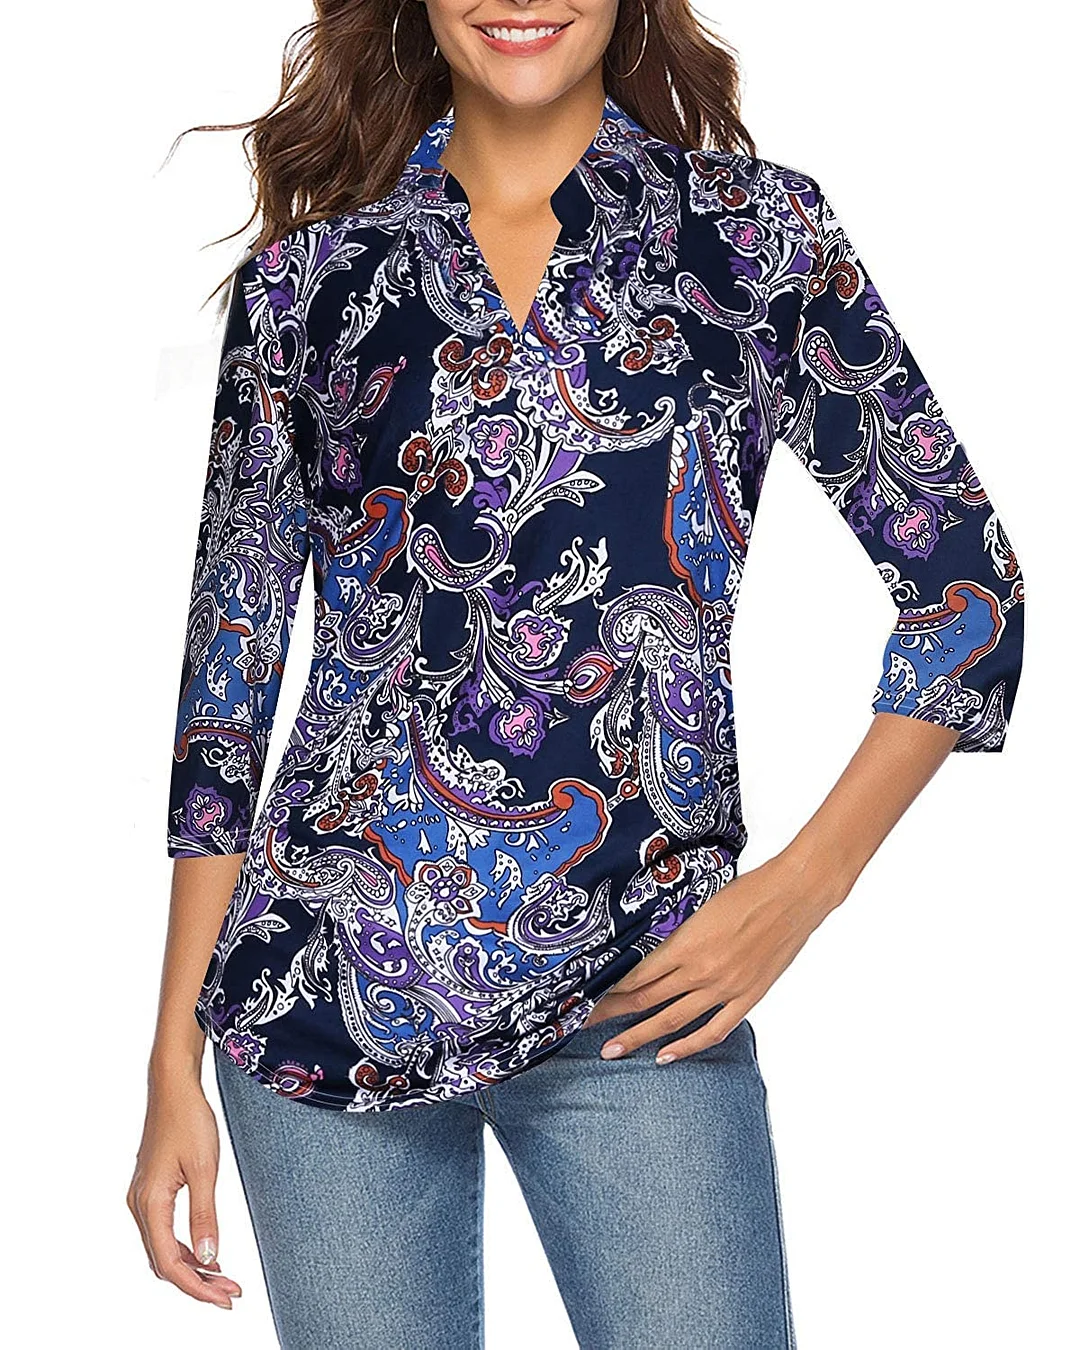 Women's 3/4 Sleeve Floral V Neck Tops Casual Tunic Blouse Loose Shirt